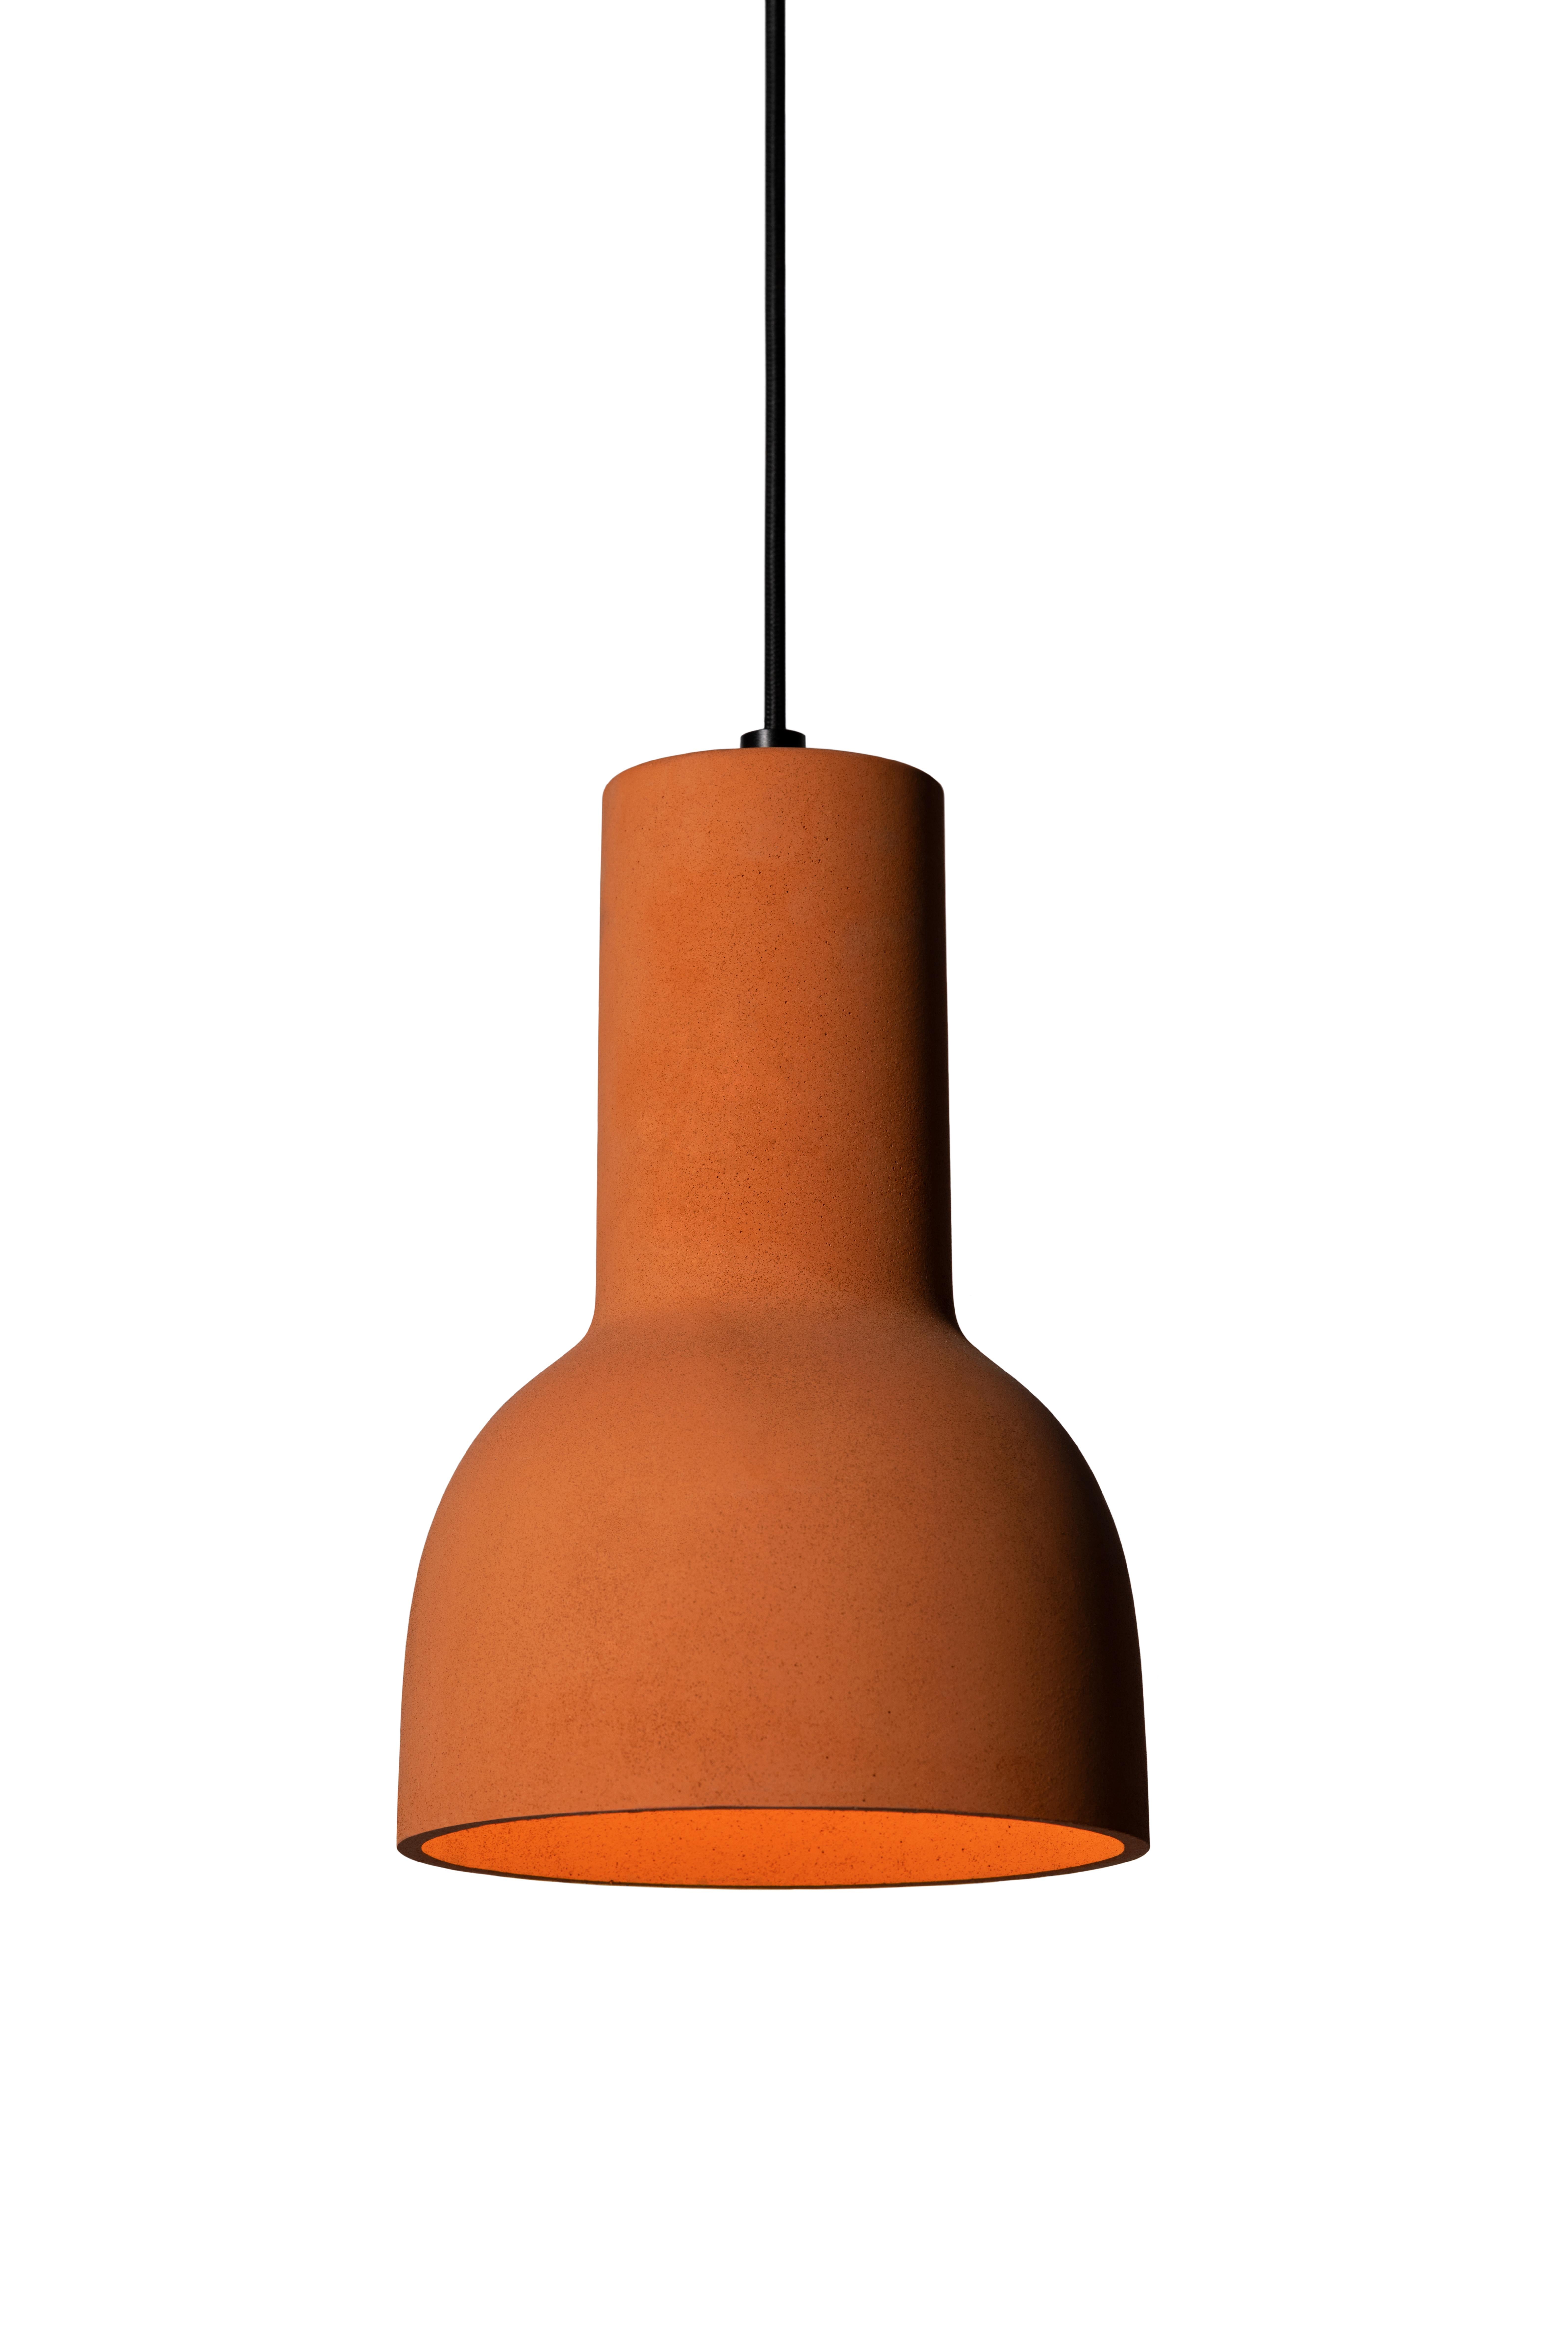 Pendant lamp 'Echo' by Nongzao x Bentu Design.
Material: Terracotta 
Color: Earthy orange 

Measures: 30 cm high, 20 cm diameter
Wire: 3 meters (black)
Lamp type: AC 100-240V 50-60Hz 9W - Comptable with US electric system.

Variations:
-